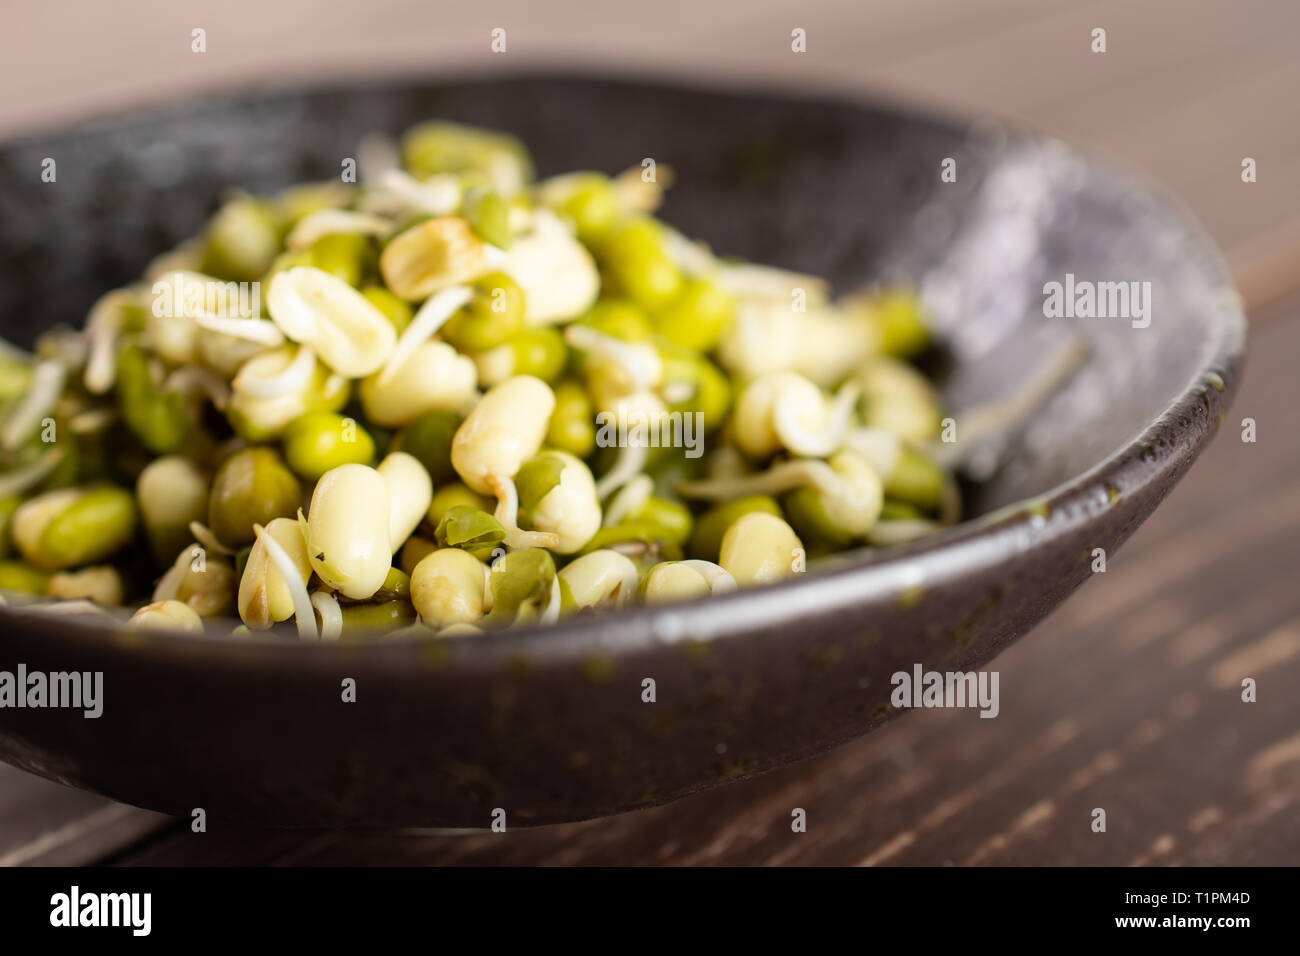 https://c8.alamy.com/comp/T1PM4D/lot-of-whole-fresh-green-bean-sprouts-mungo-in-a-grey-ceramic-bowl-on-brown-wood-T1PM4D.jpg